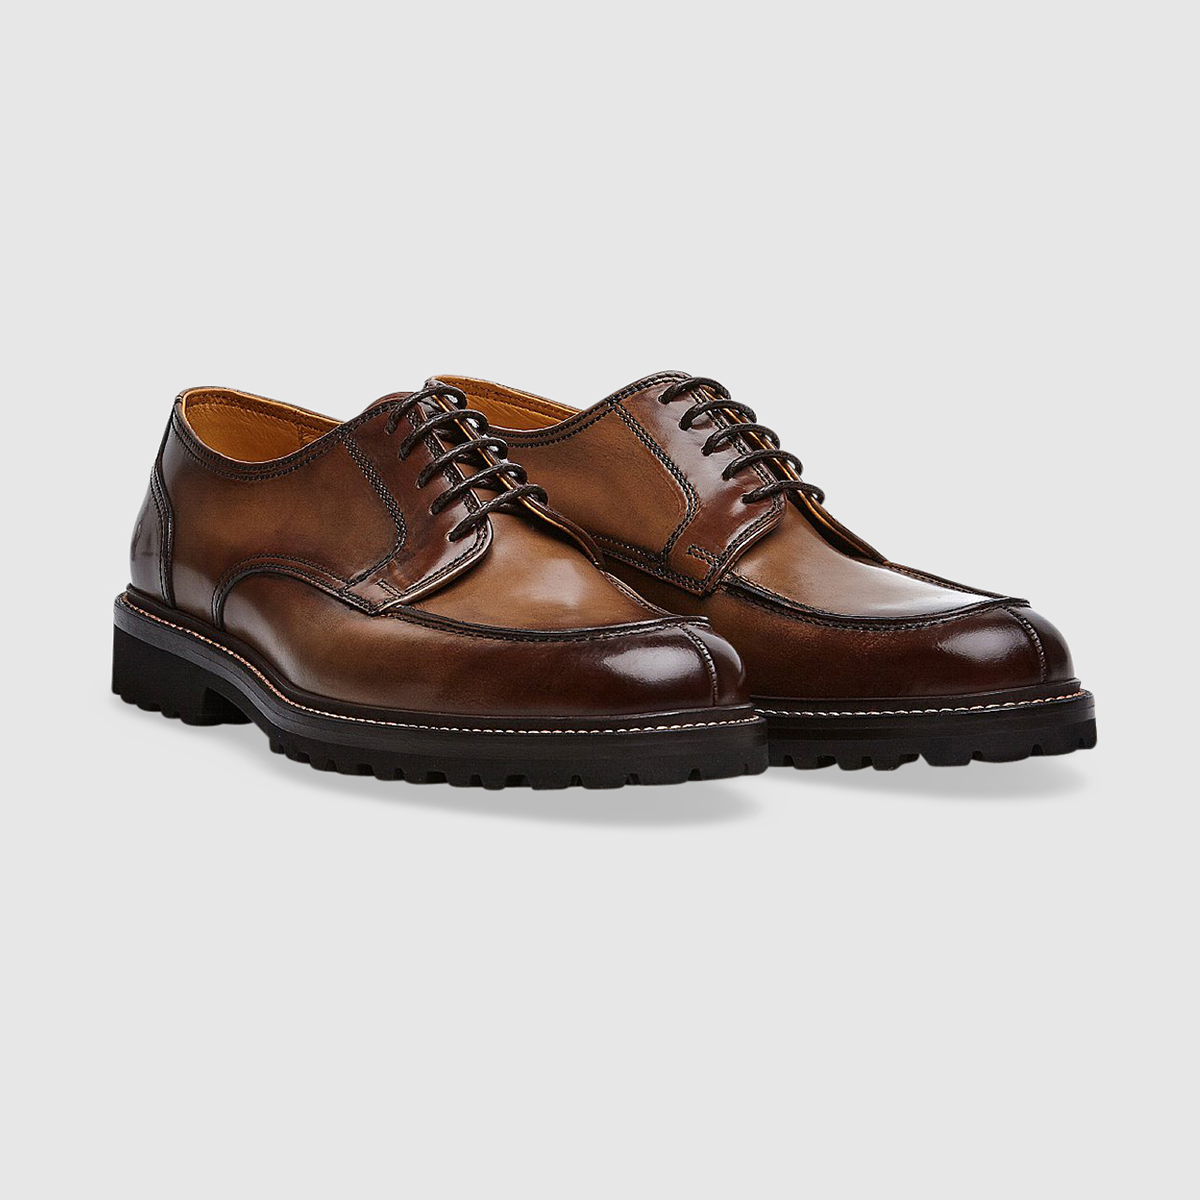 Five Hole Lace-up Shoes in Dark Brown Calfskin Gruppo Fabi on sale 2022 2